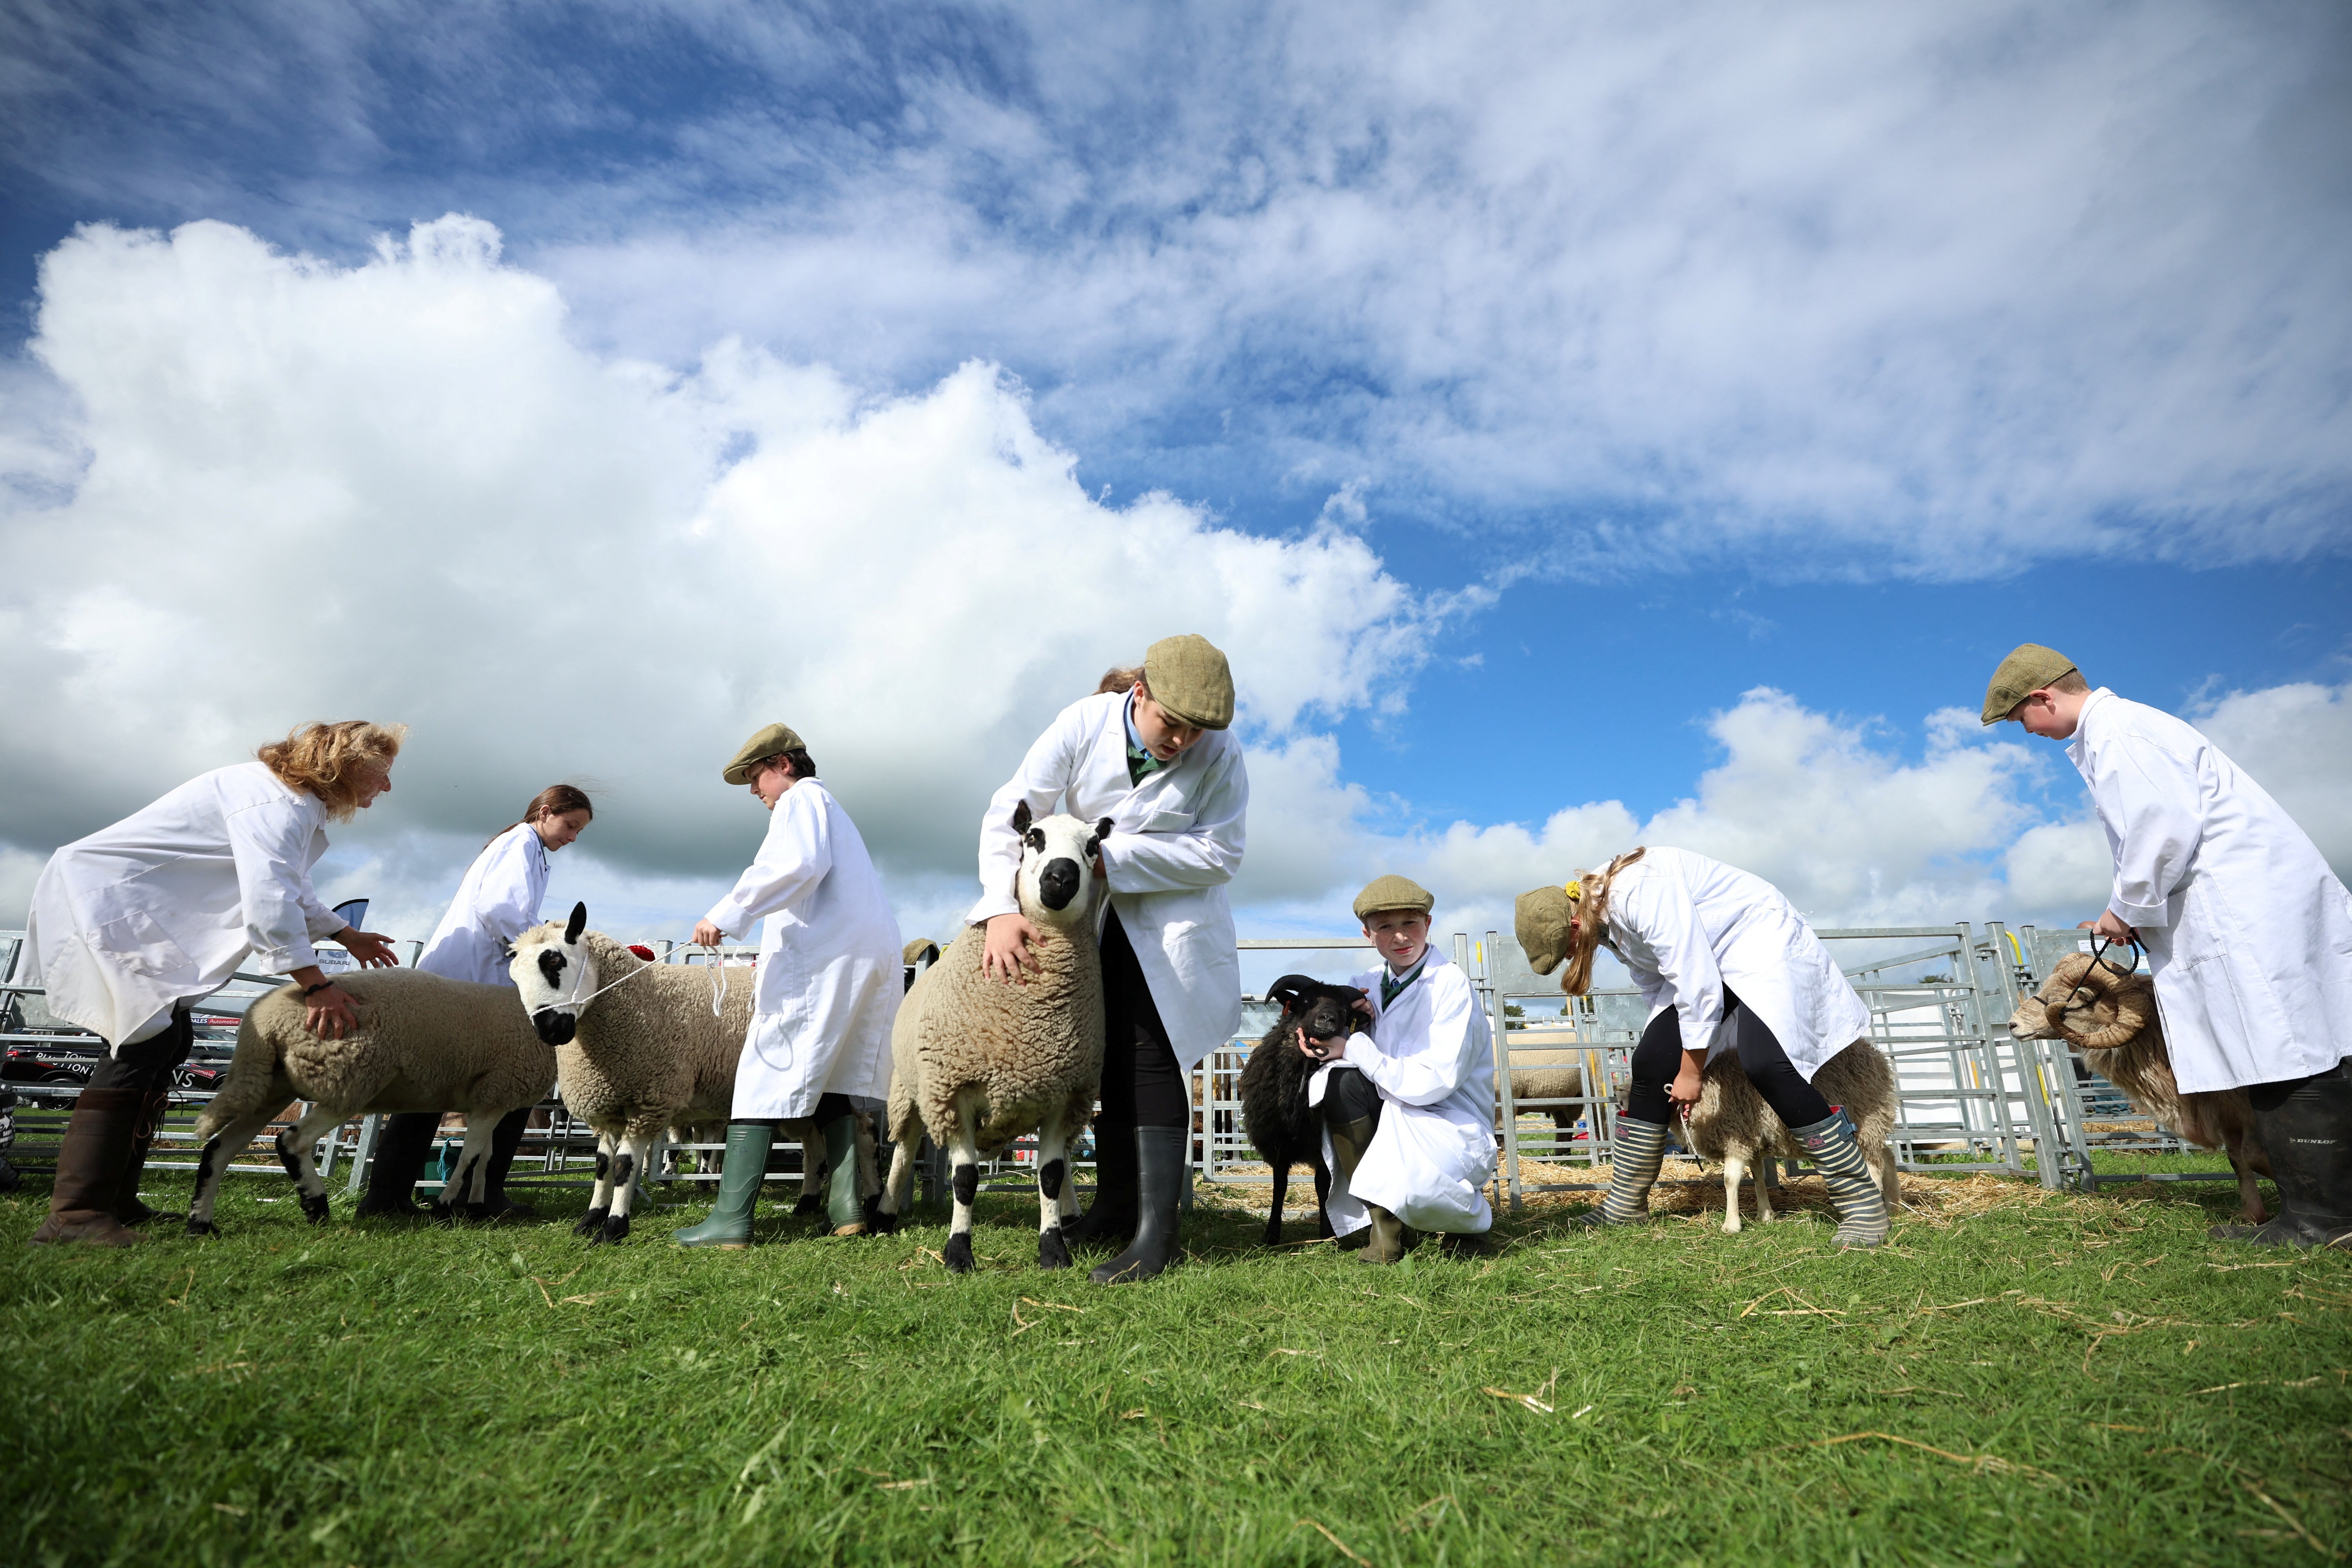 Woodchurch High School pupils line up with their sheep after competing in the Young Handlers class at the Westmorland County Show near Kendal